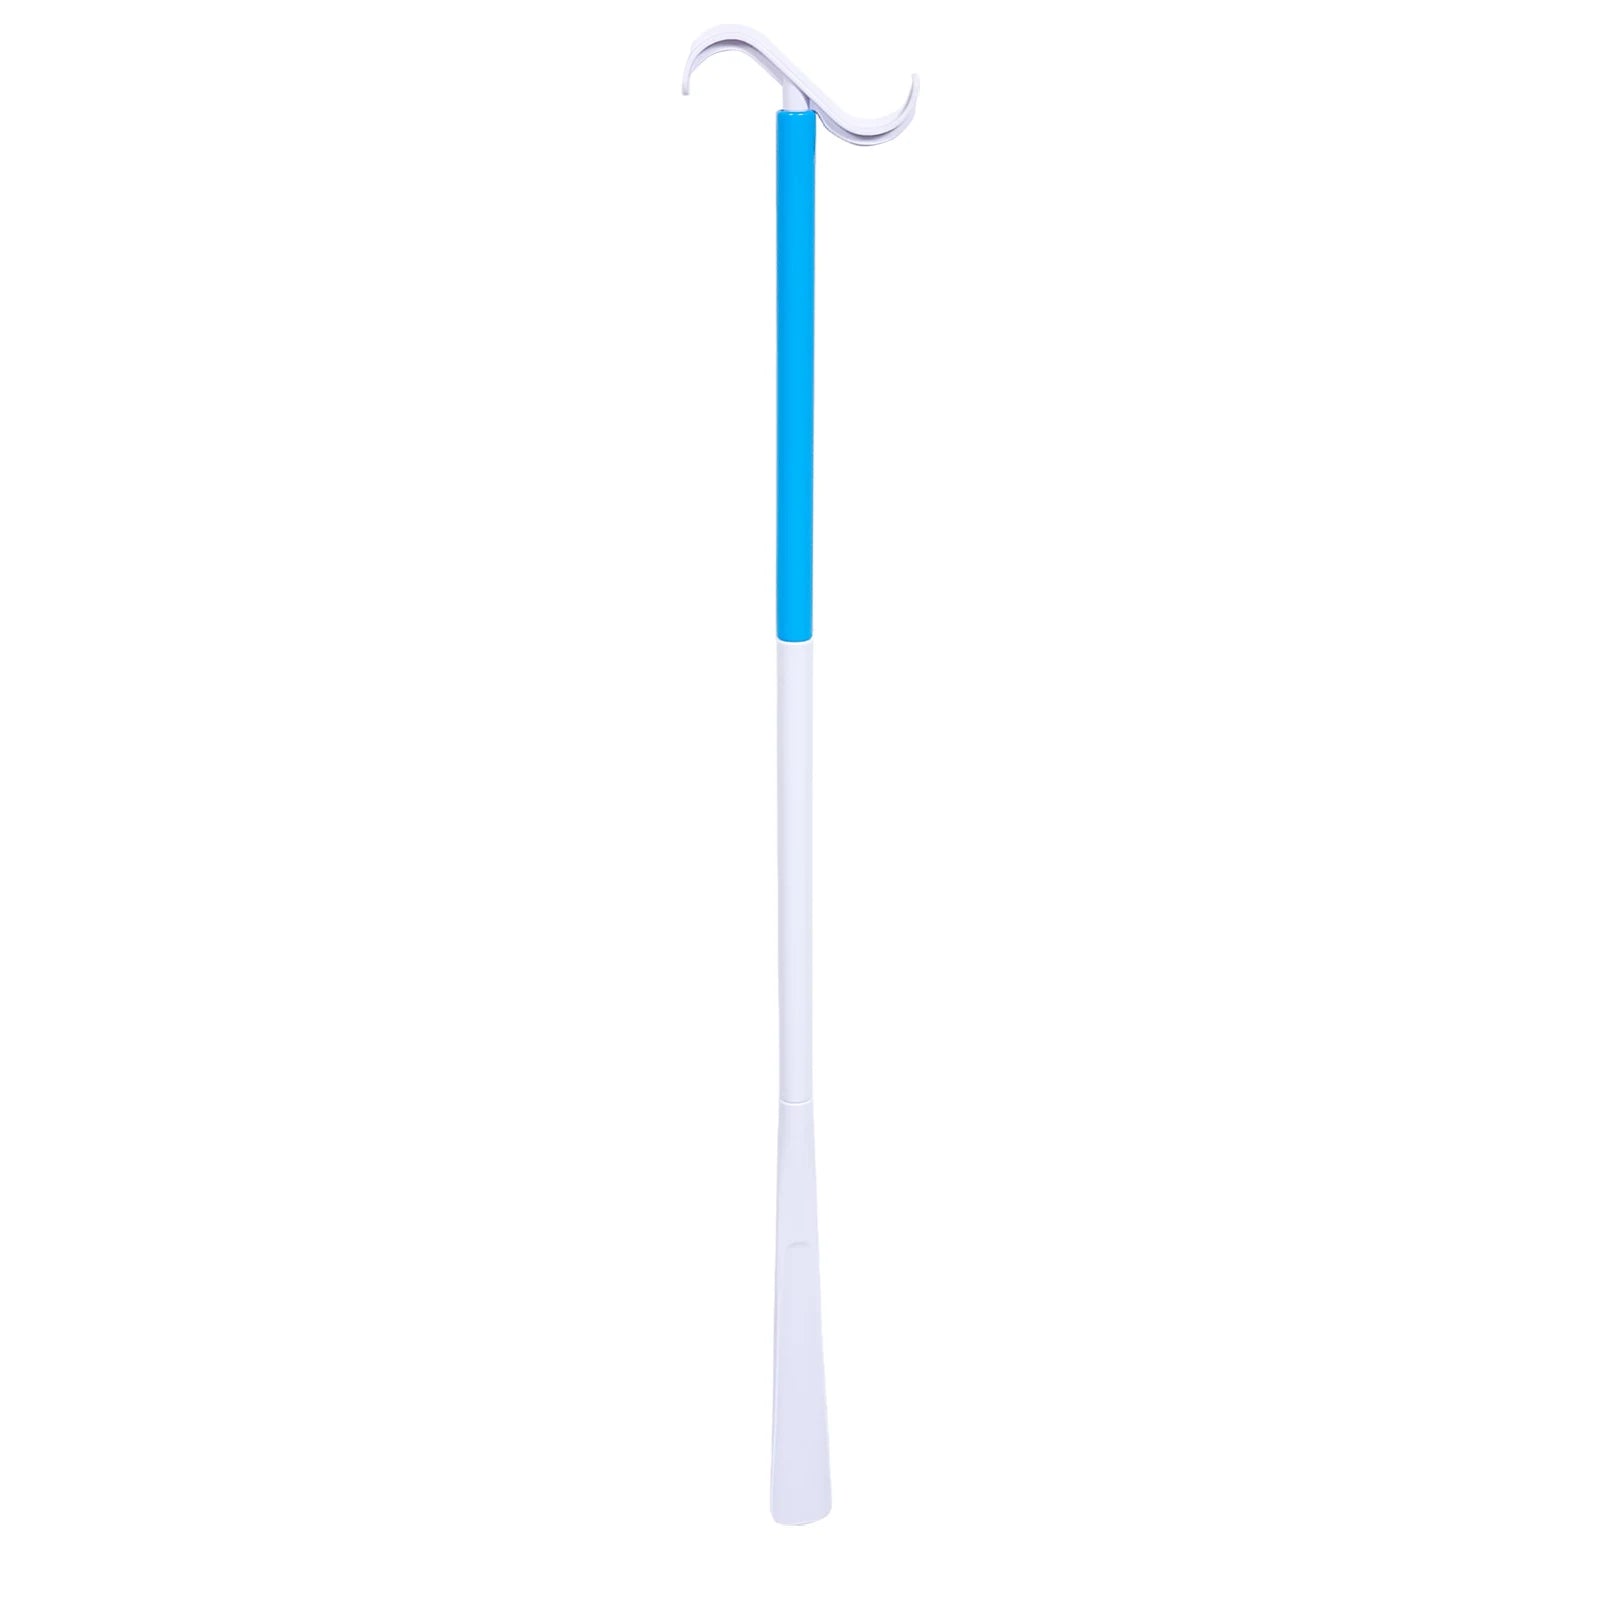 Two-in-One Dressing Aid and Shoehorn for the Elderly and Disabled